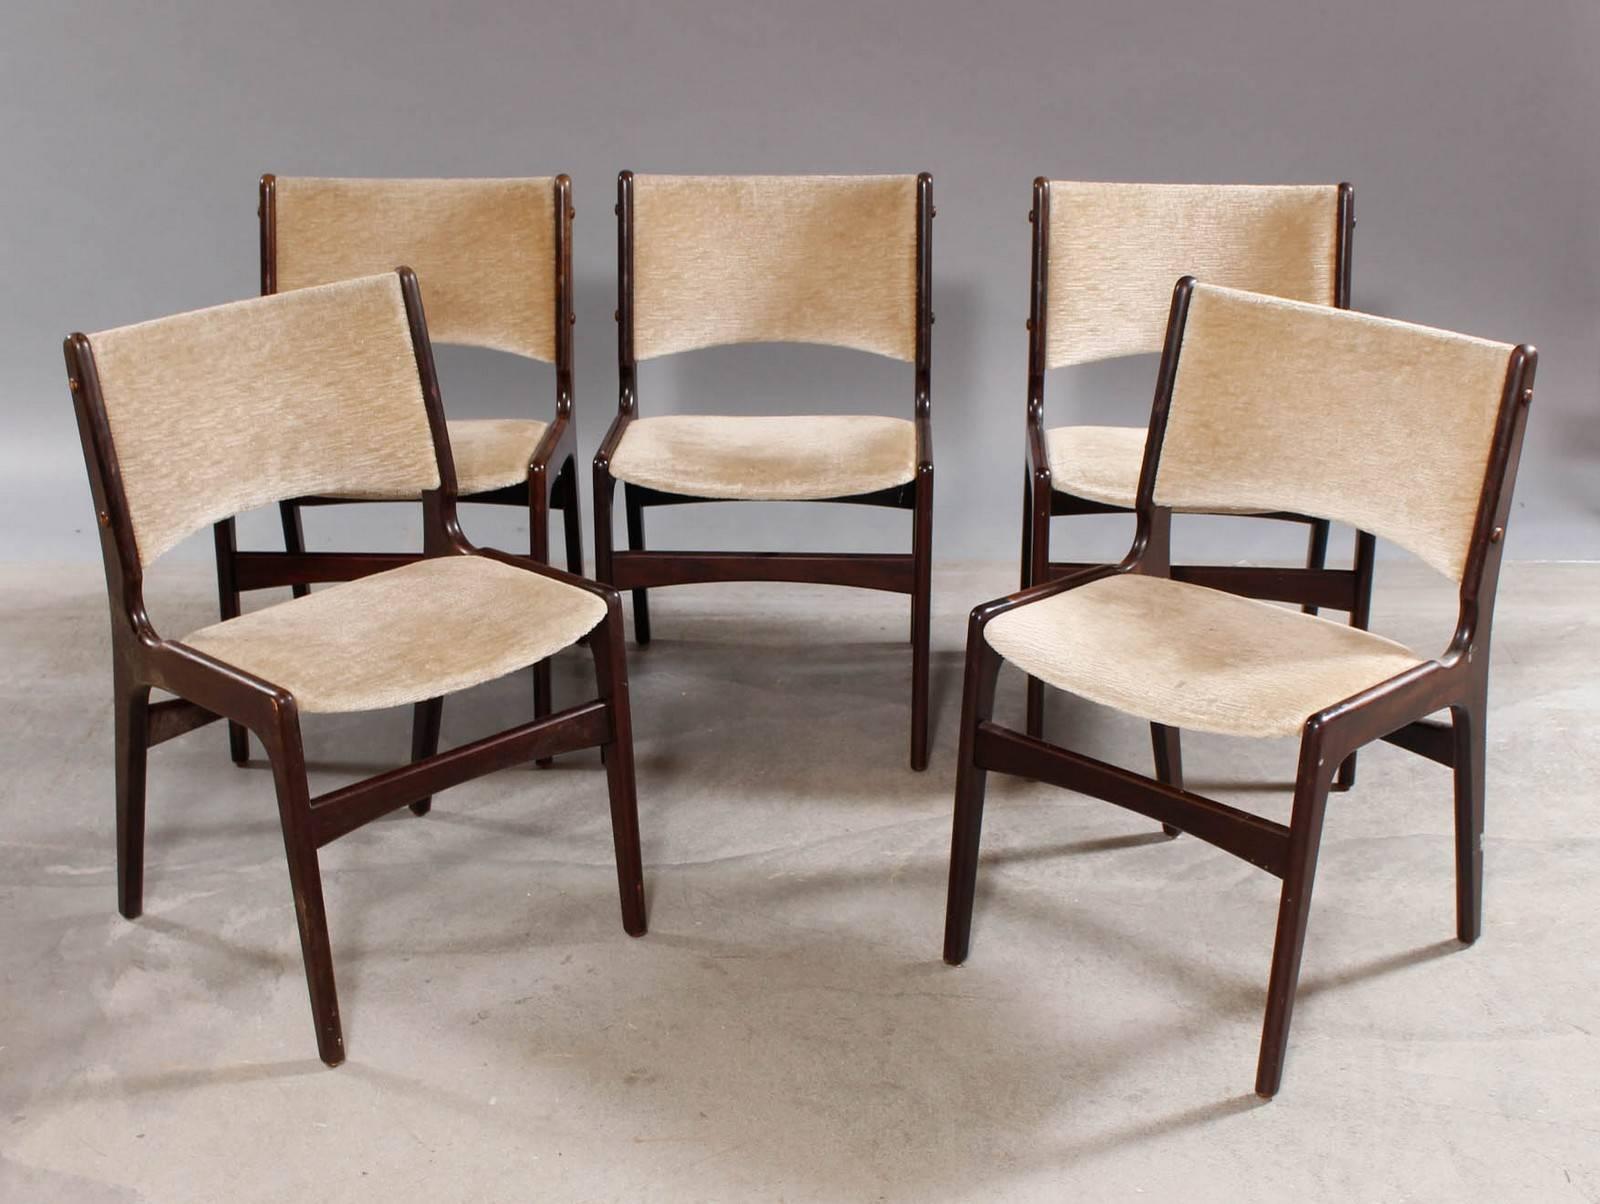 Five Erik Buch dining chairs made by Odense Maskinsnedkeri.

The chairs feature a solid teak frame and white/grey velvet and are as all of Erik Buchs chairs characterized by high-quality materials, solid craftsmanship, Scandinavian aesthetic and not